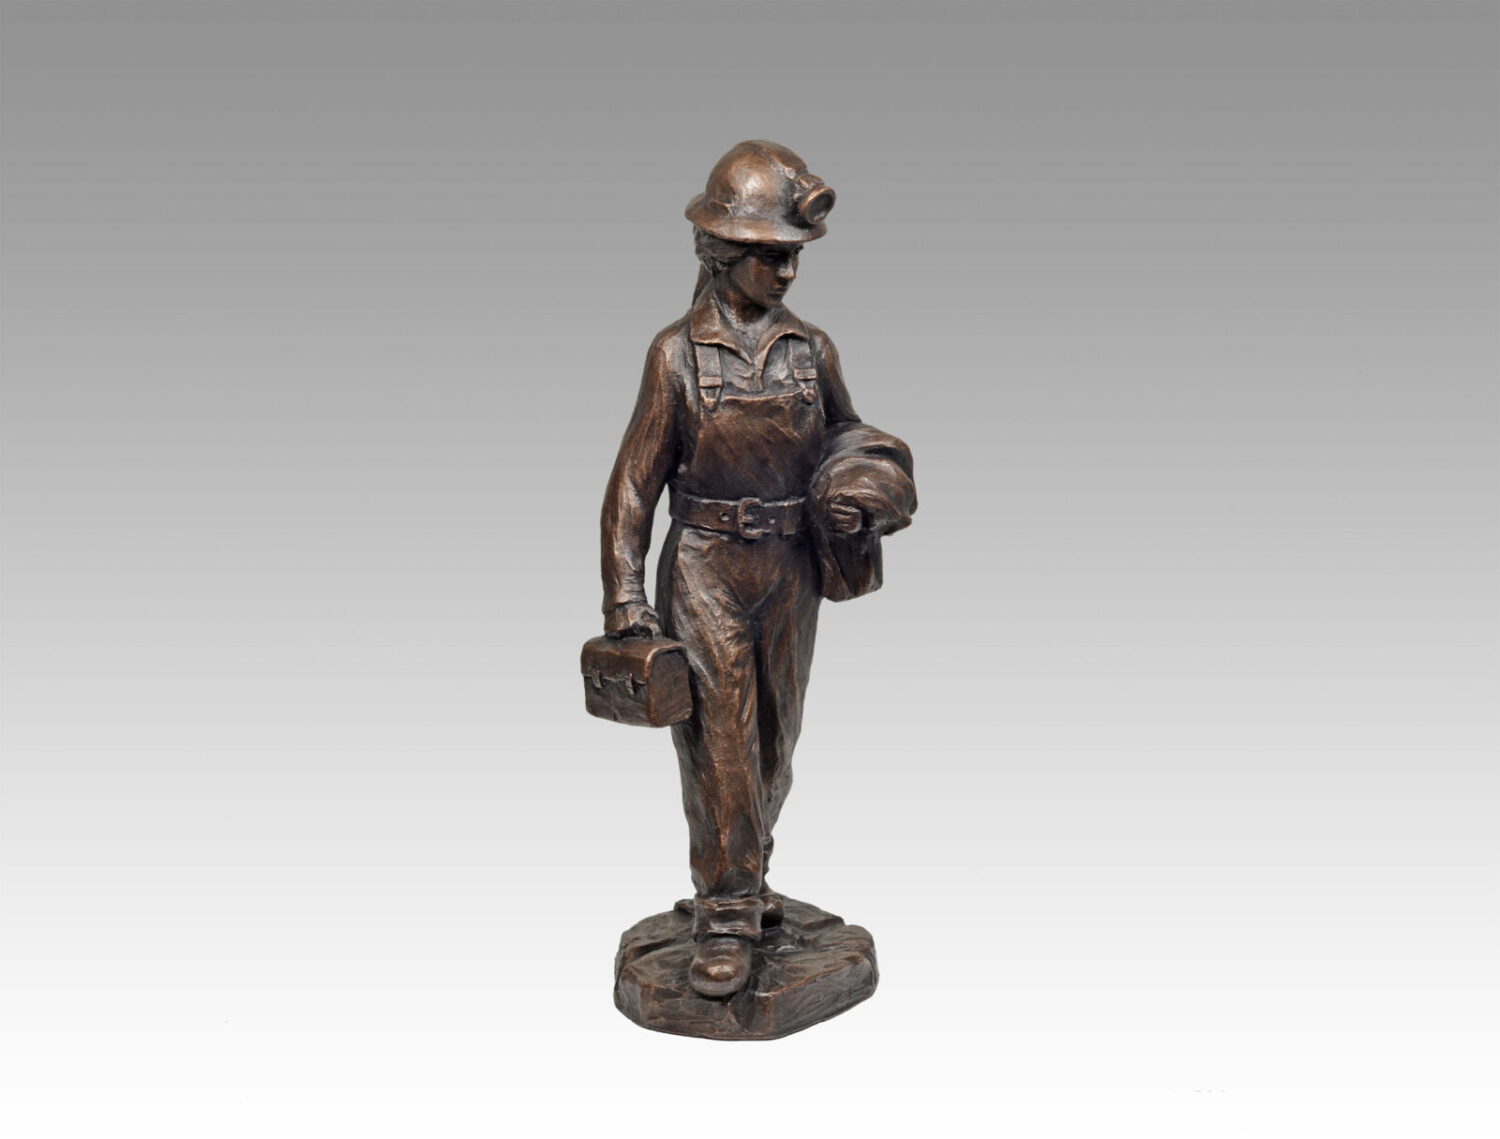 Gallery, Hardrock Woman, $250 CAD, Metal Infused, 14" H, Edition 80, Mining Sculpture of a Woman miner coming off shift, Sculptor Tyler Fauvelle